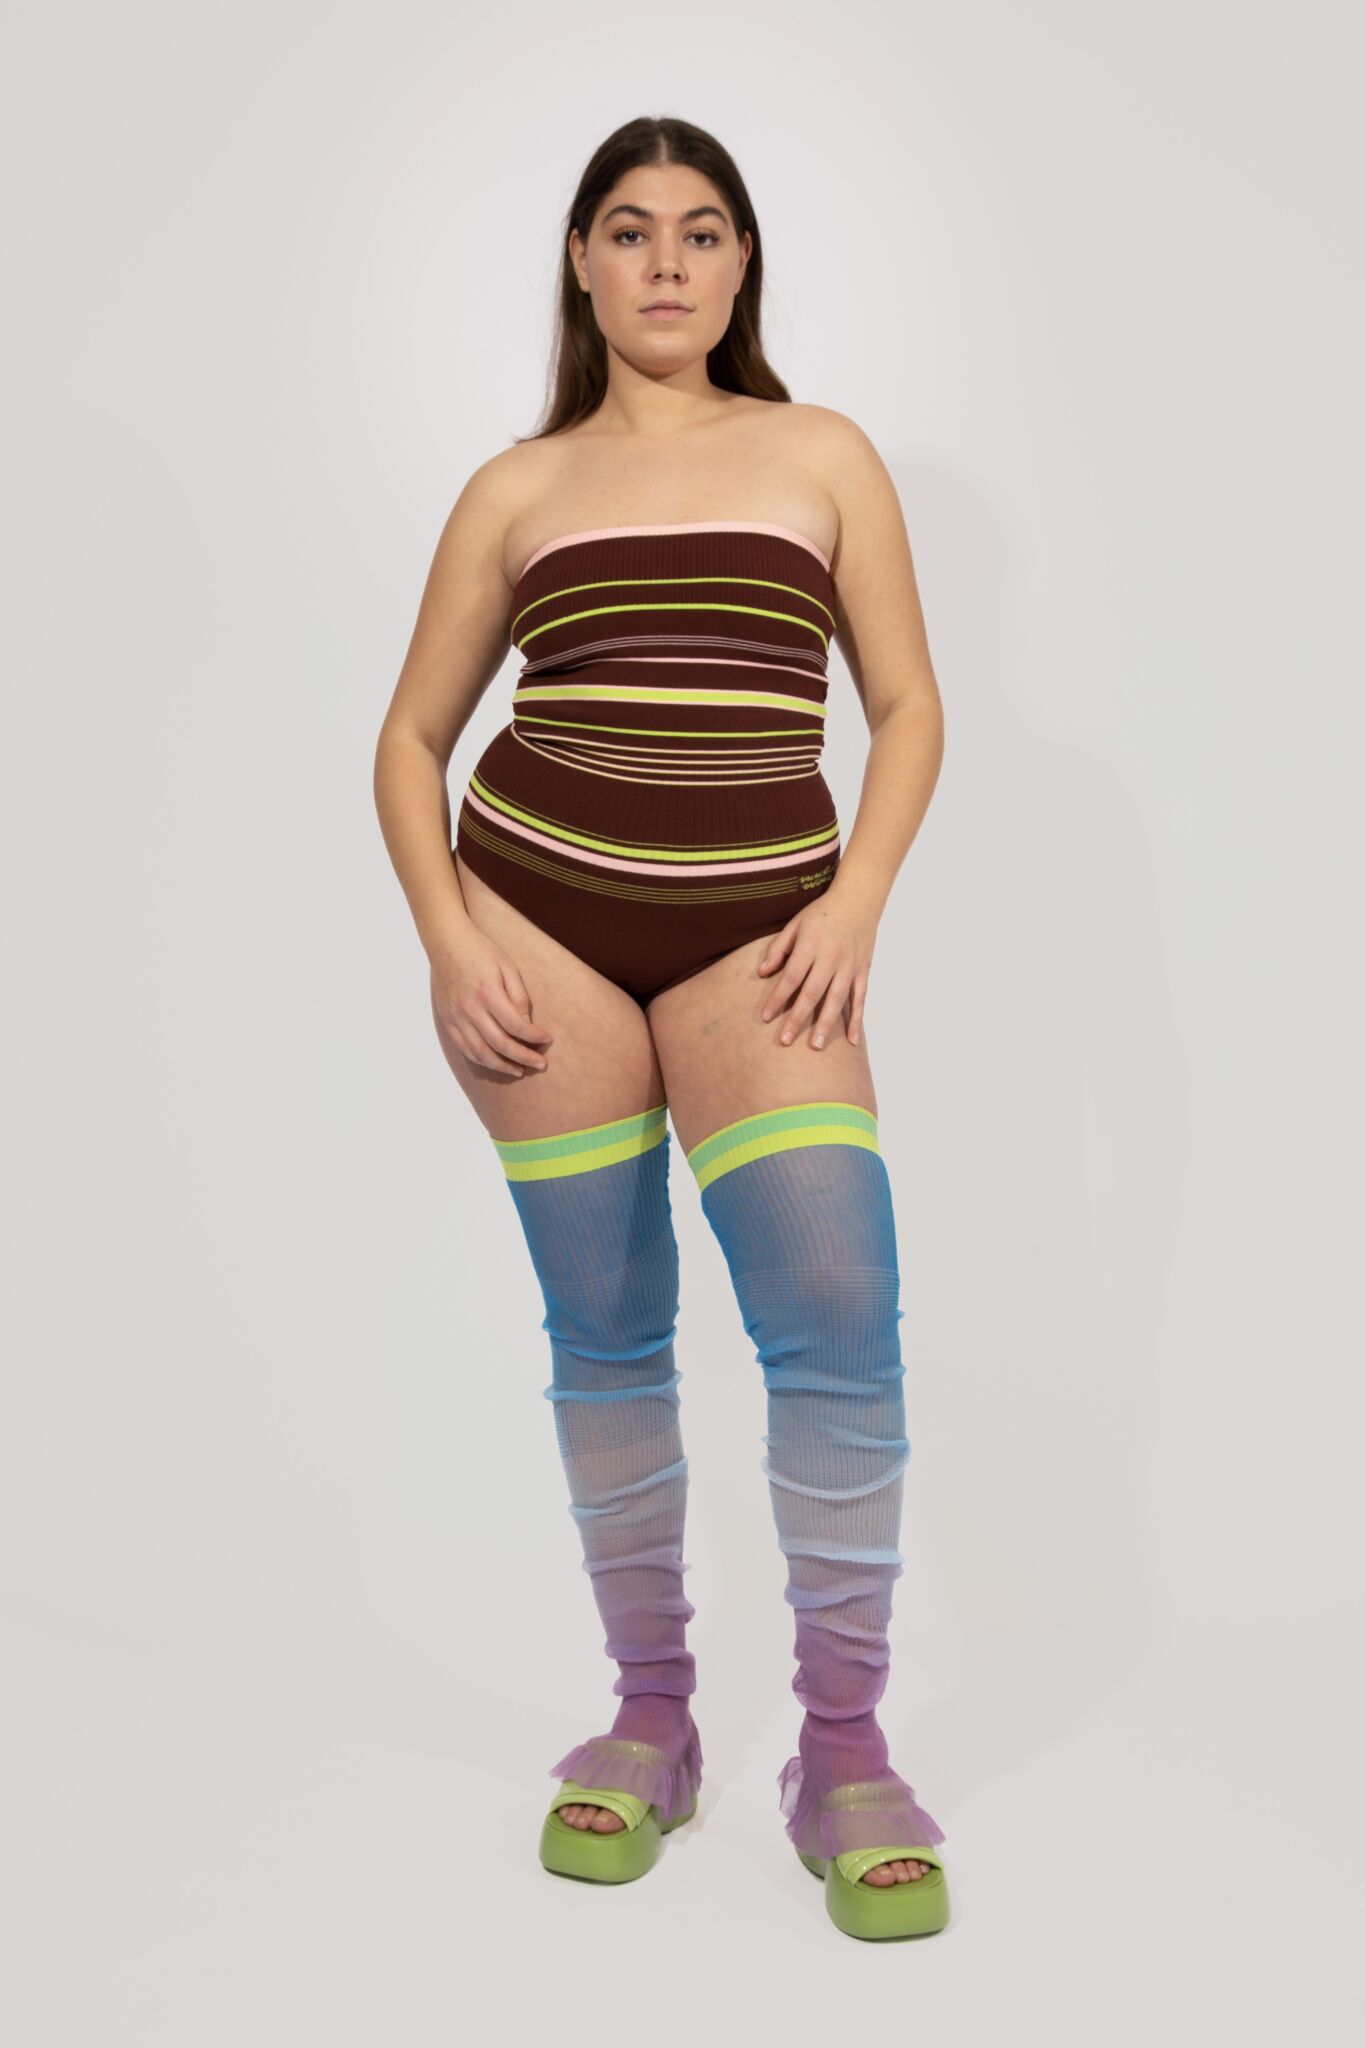 Long Gradient Frills in blue and lavender, transparent high frills and Sporty Stripe knitted Body in brown and pink, strapless bodysuit